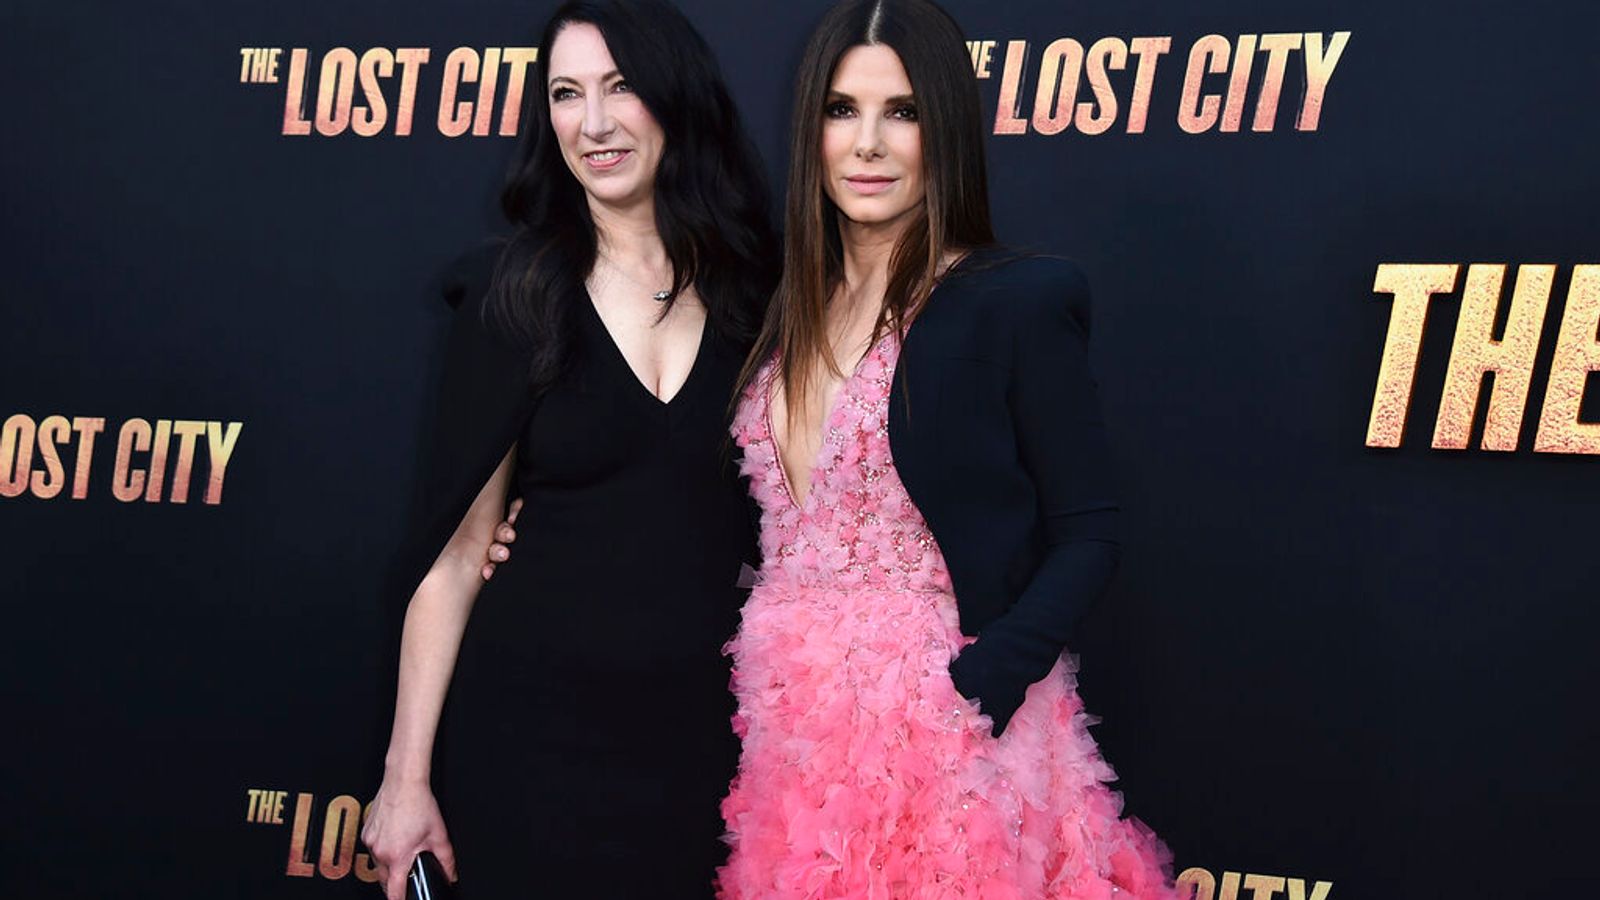 Sandra Bullock's sister pays tribute to Bryan Randall - and shares details of how 'amazing' star cared for him before his death